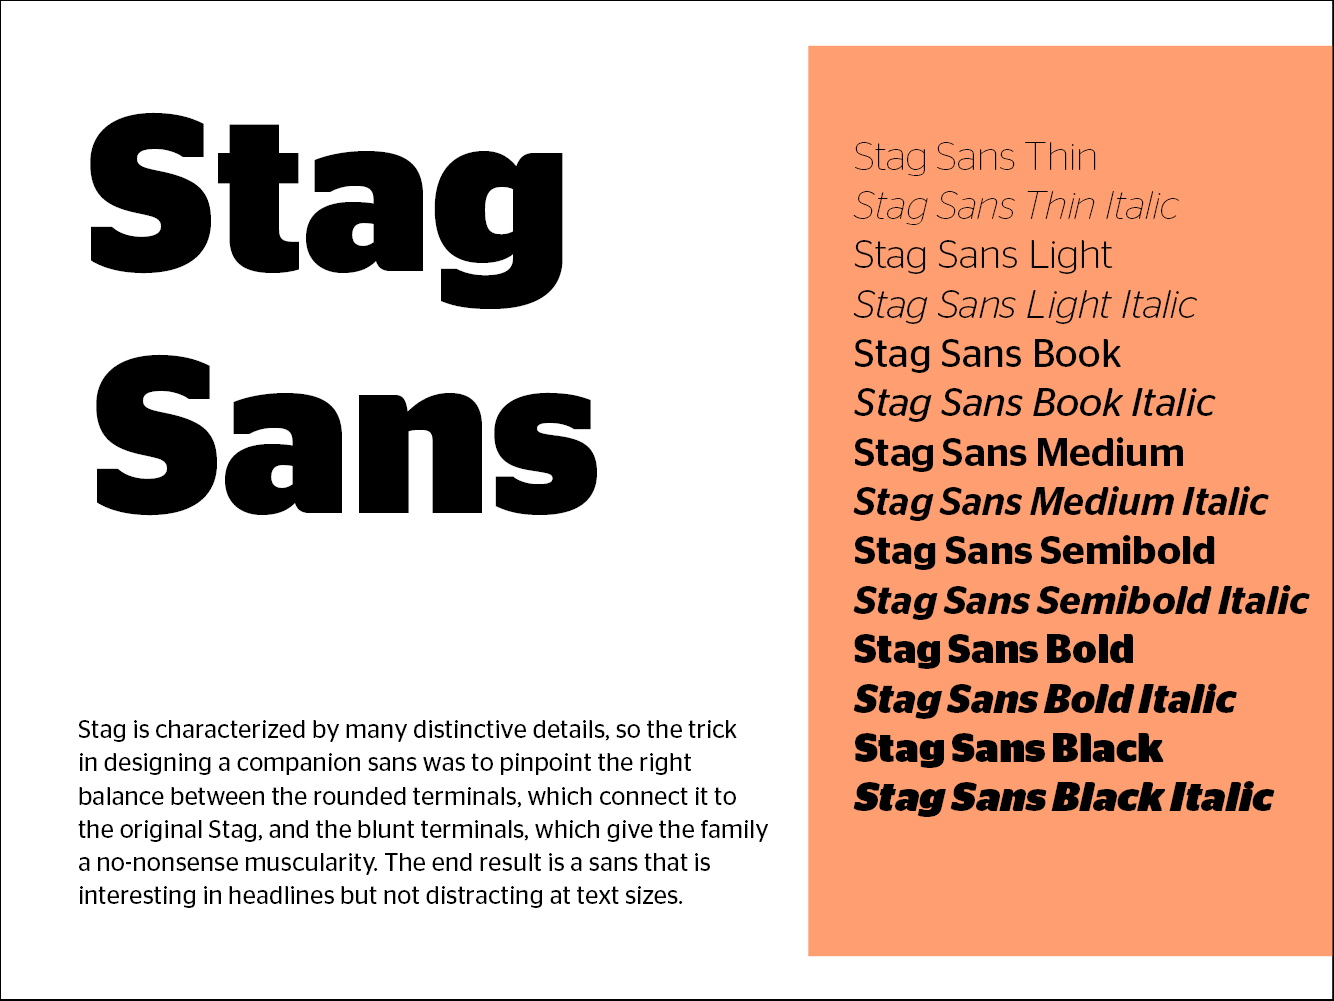 stag slab serif font examples